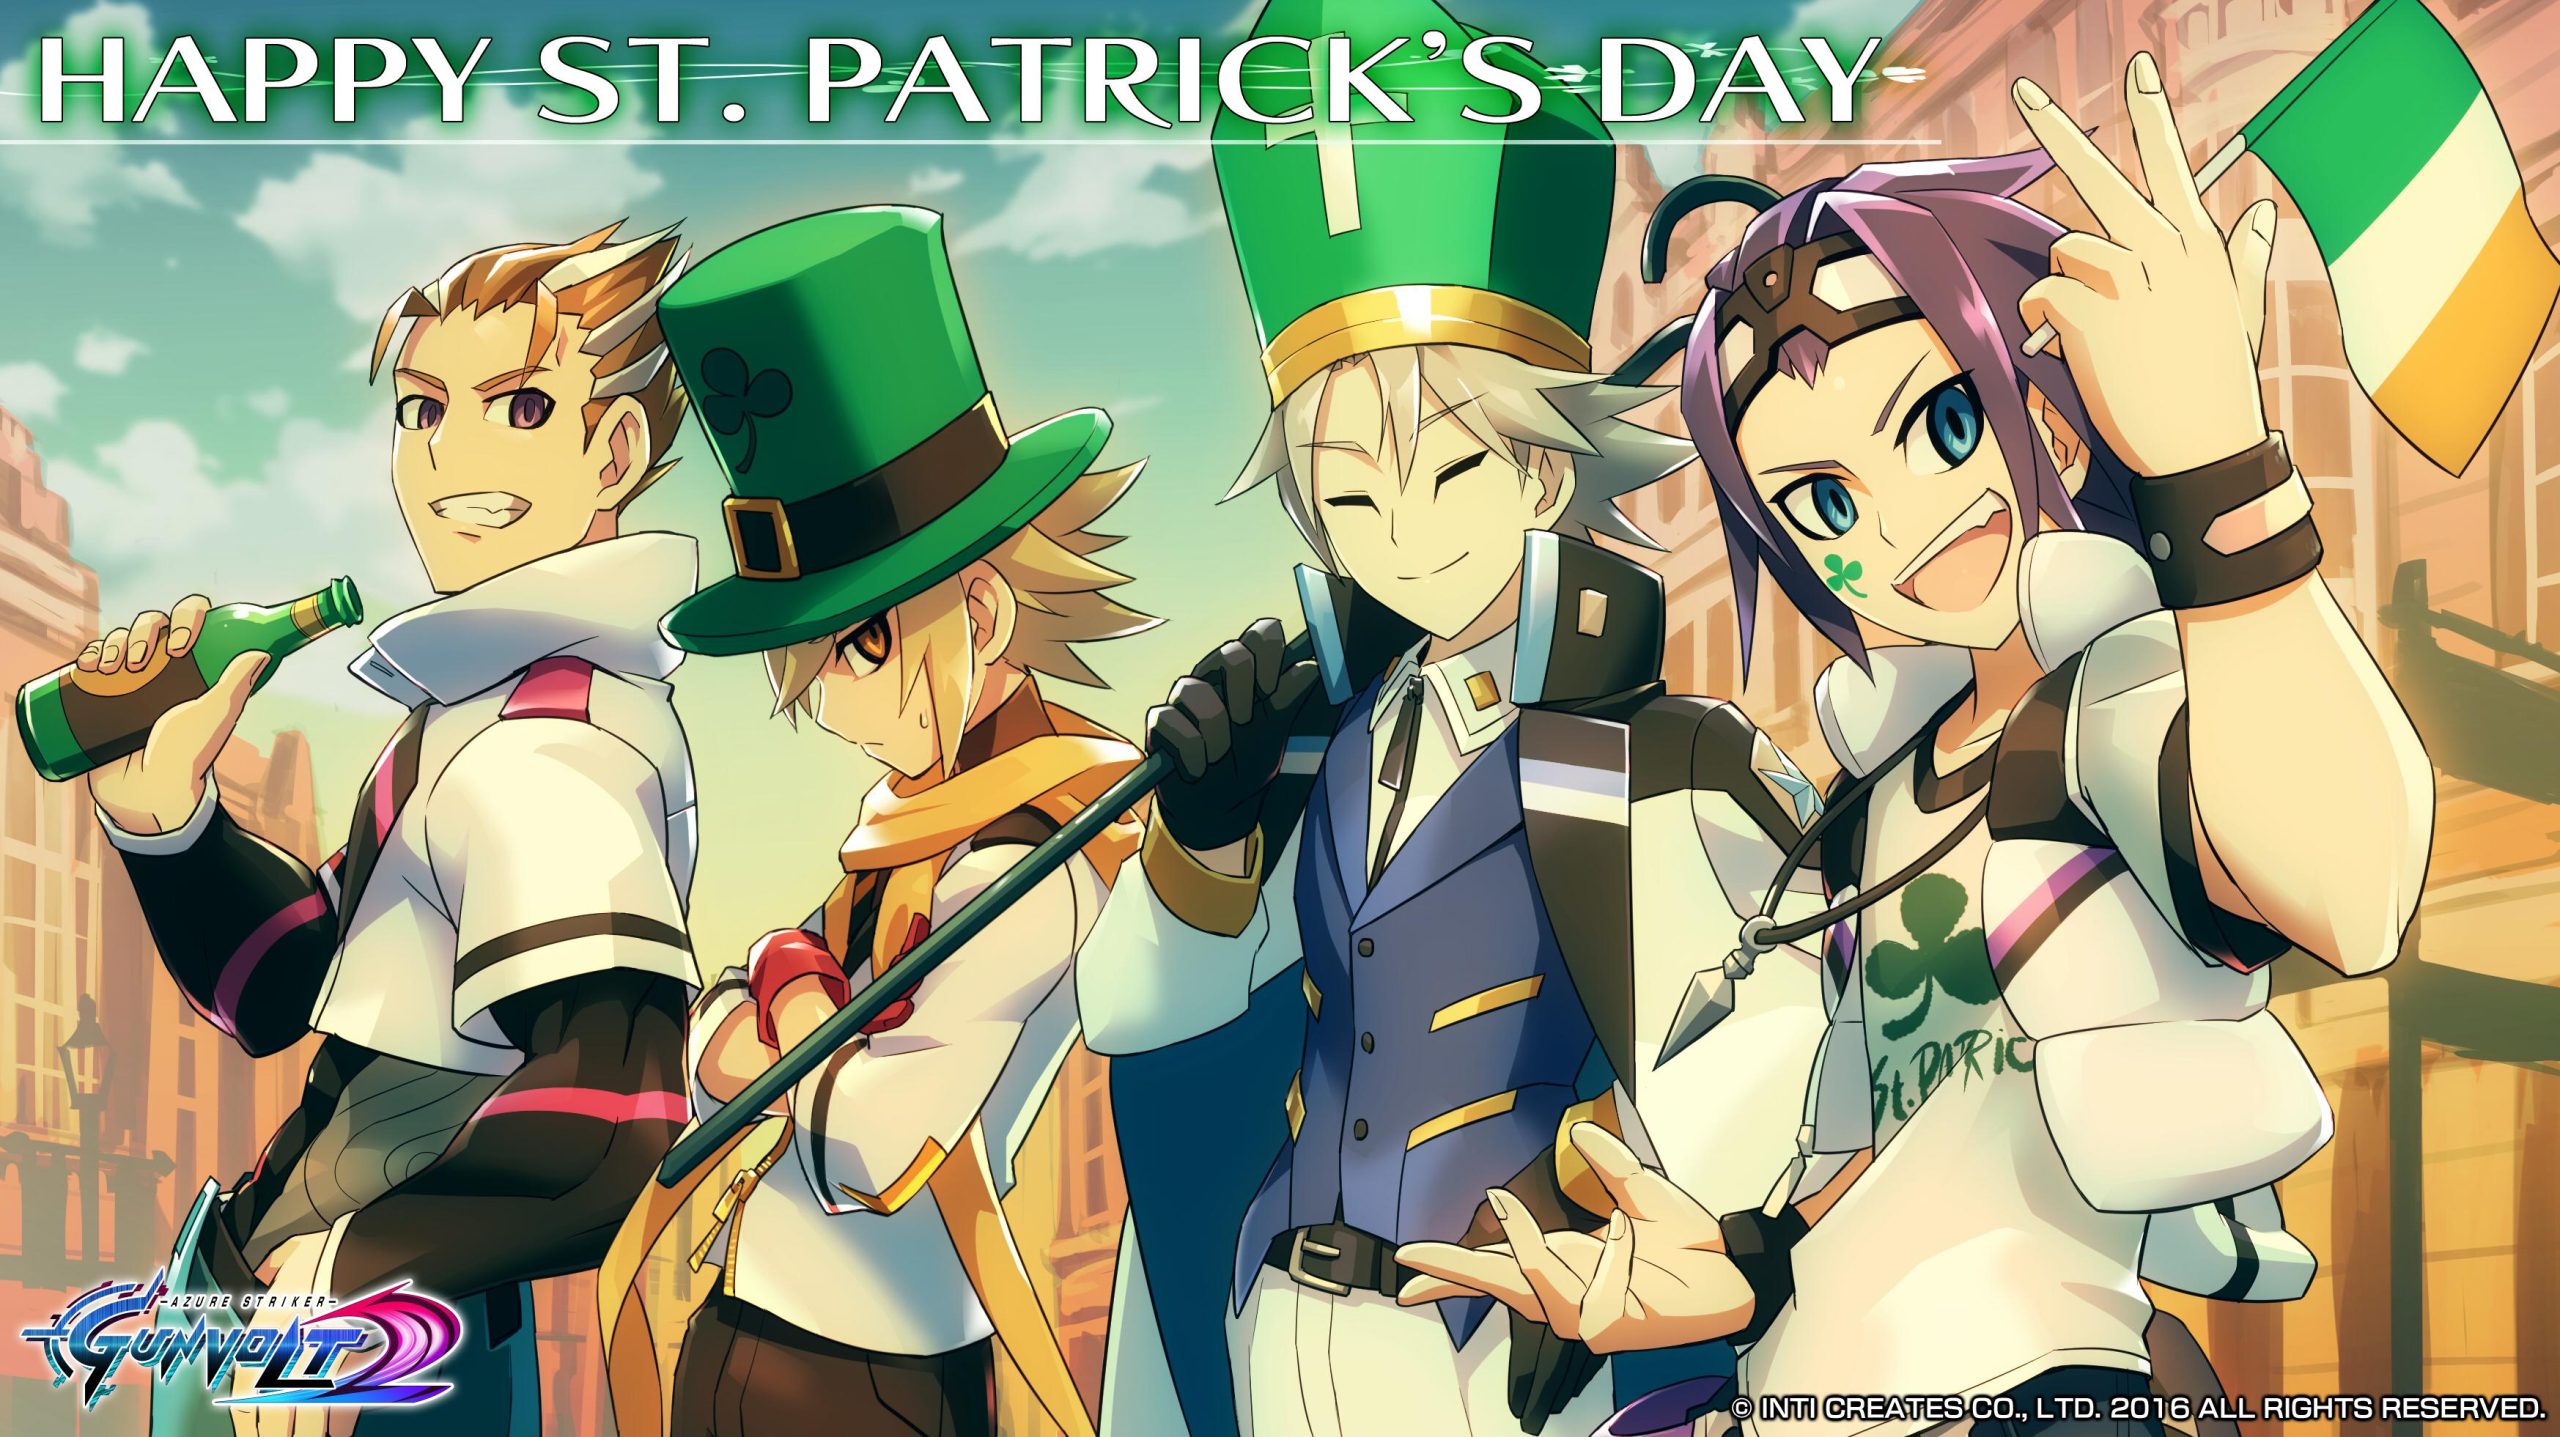 Anime St Patrick's Day Wallpaper For Pc, Anime St Patrick's Day, Anime